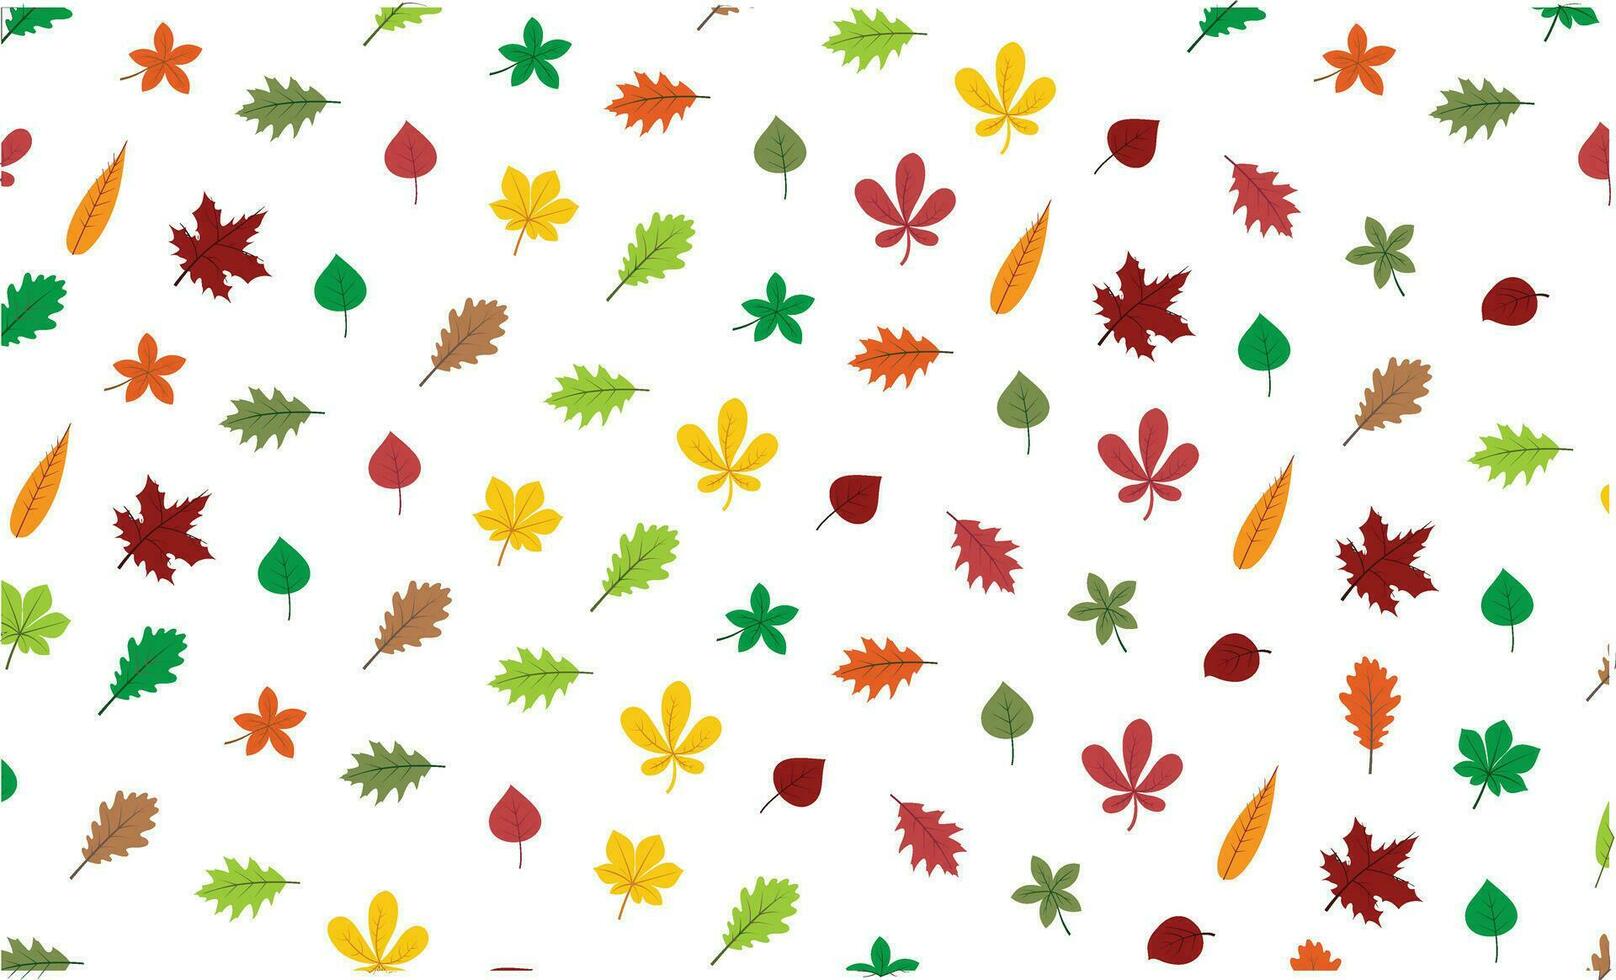 autumn leaves collection vector